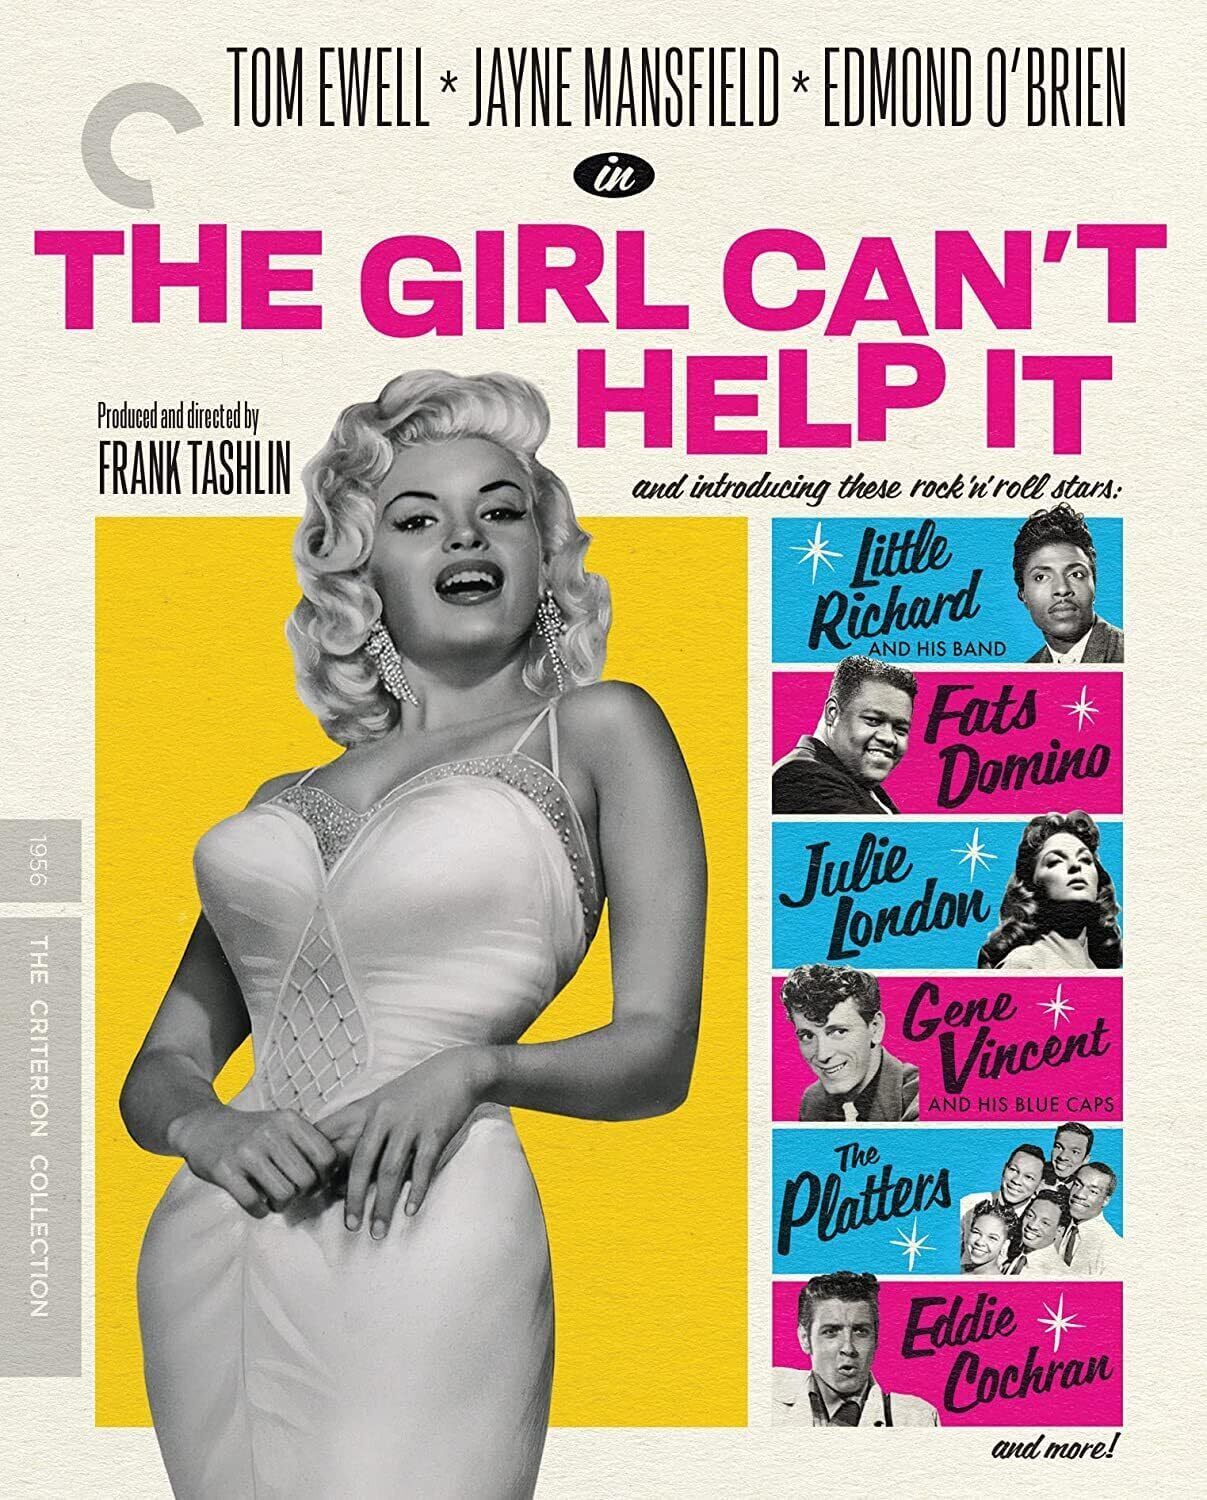 The Girl Can’t Help It (The Criterion Collection) [Blu-ray]